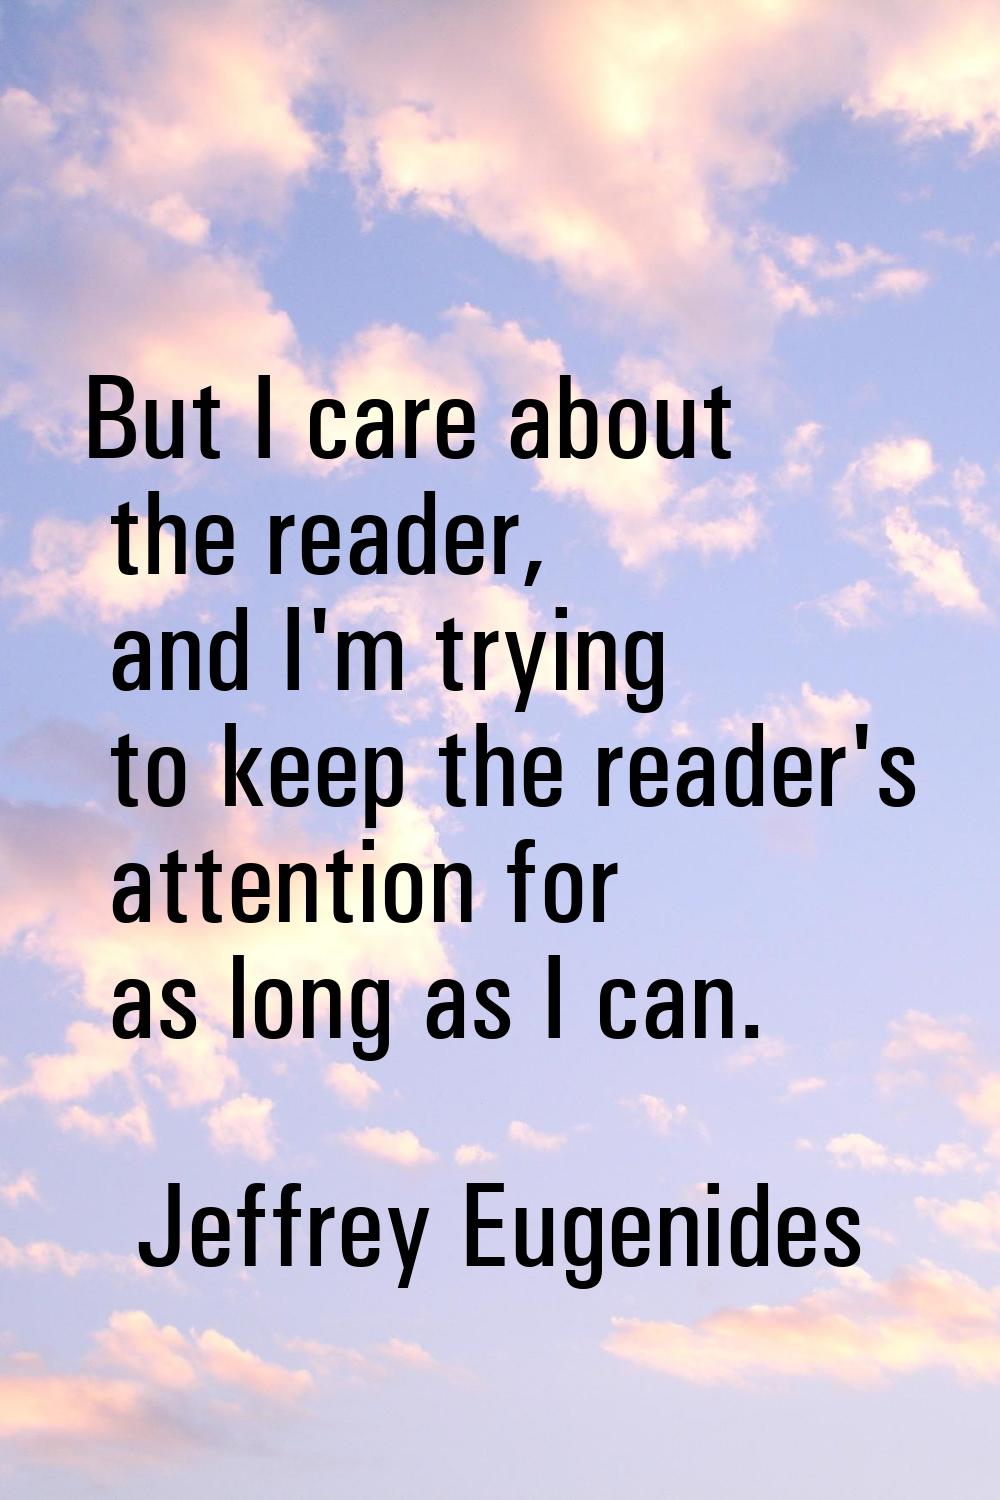 But I care about the reader, and I'm trying to keep the reader's attention for as long as I can.